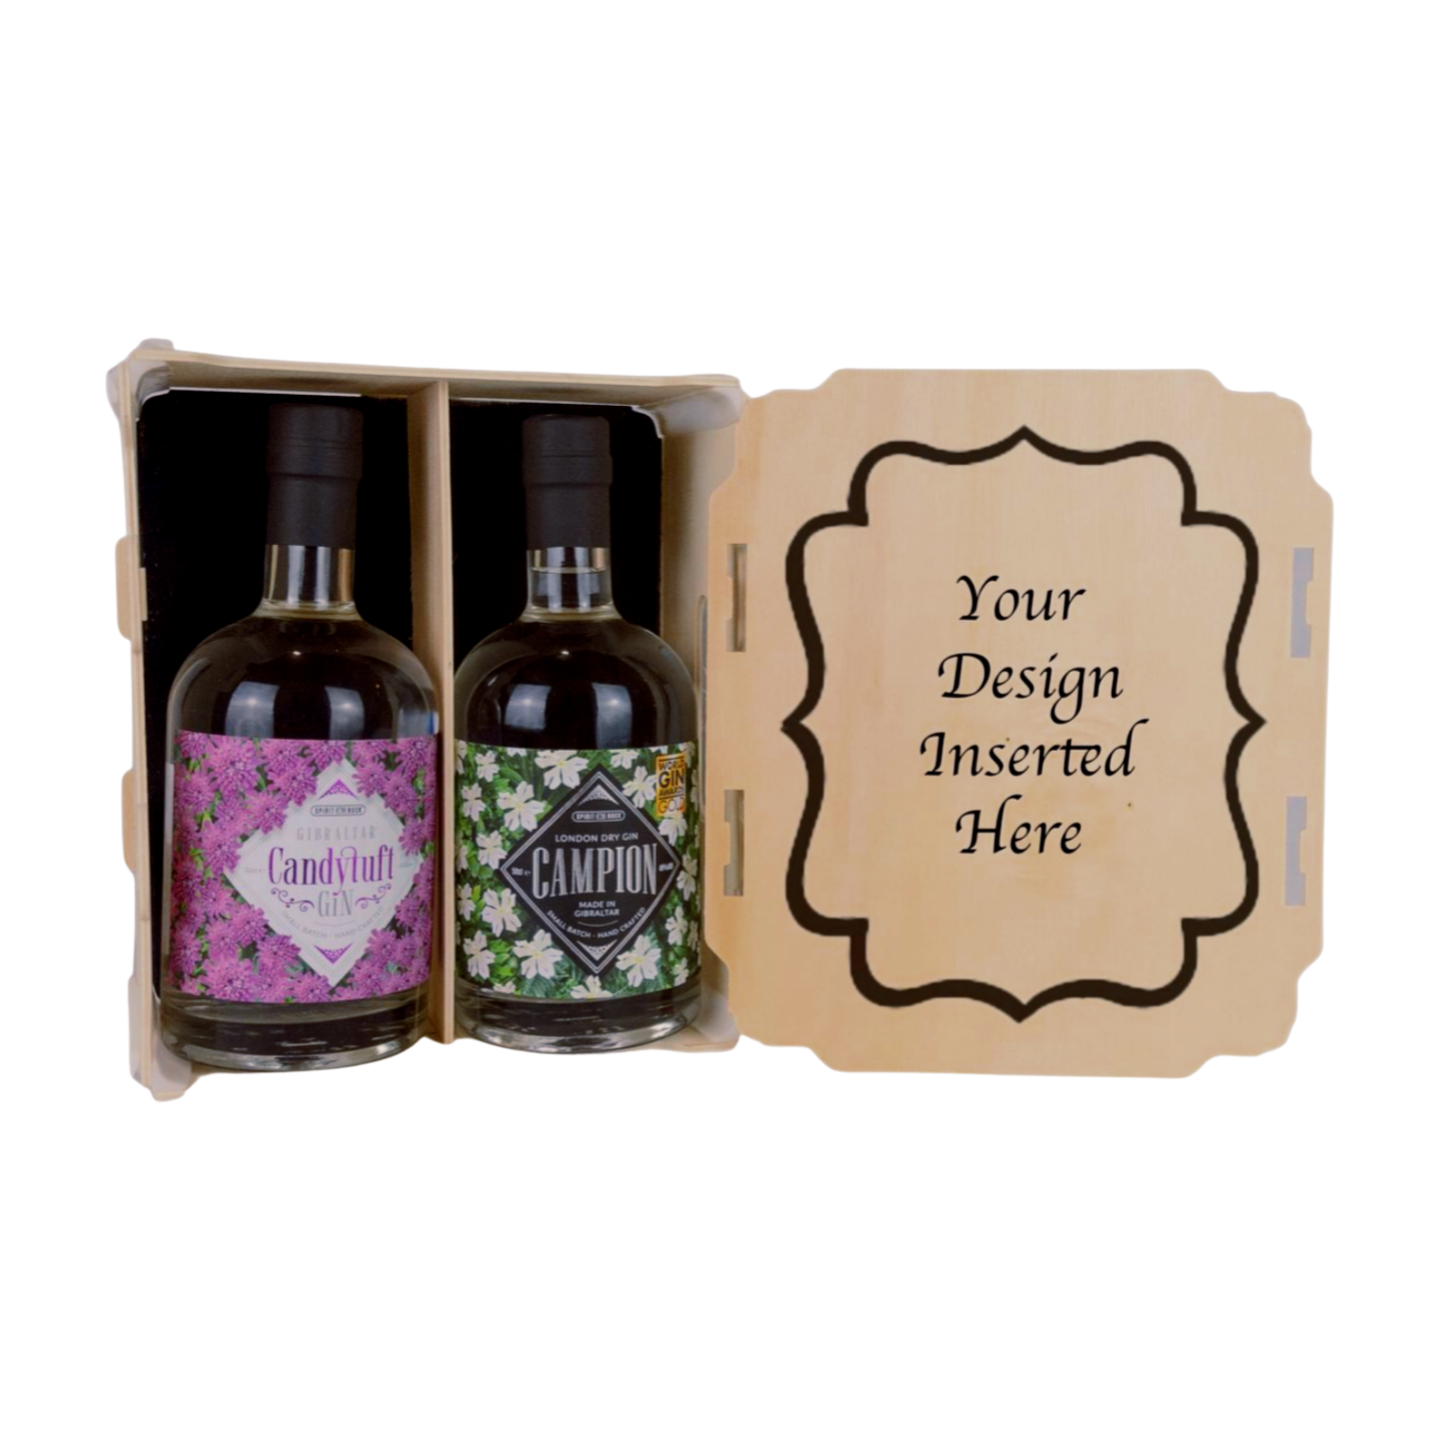 campion and candytuft in stylish wooden gift box